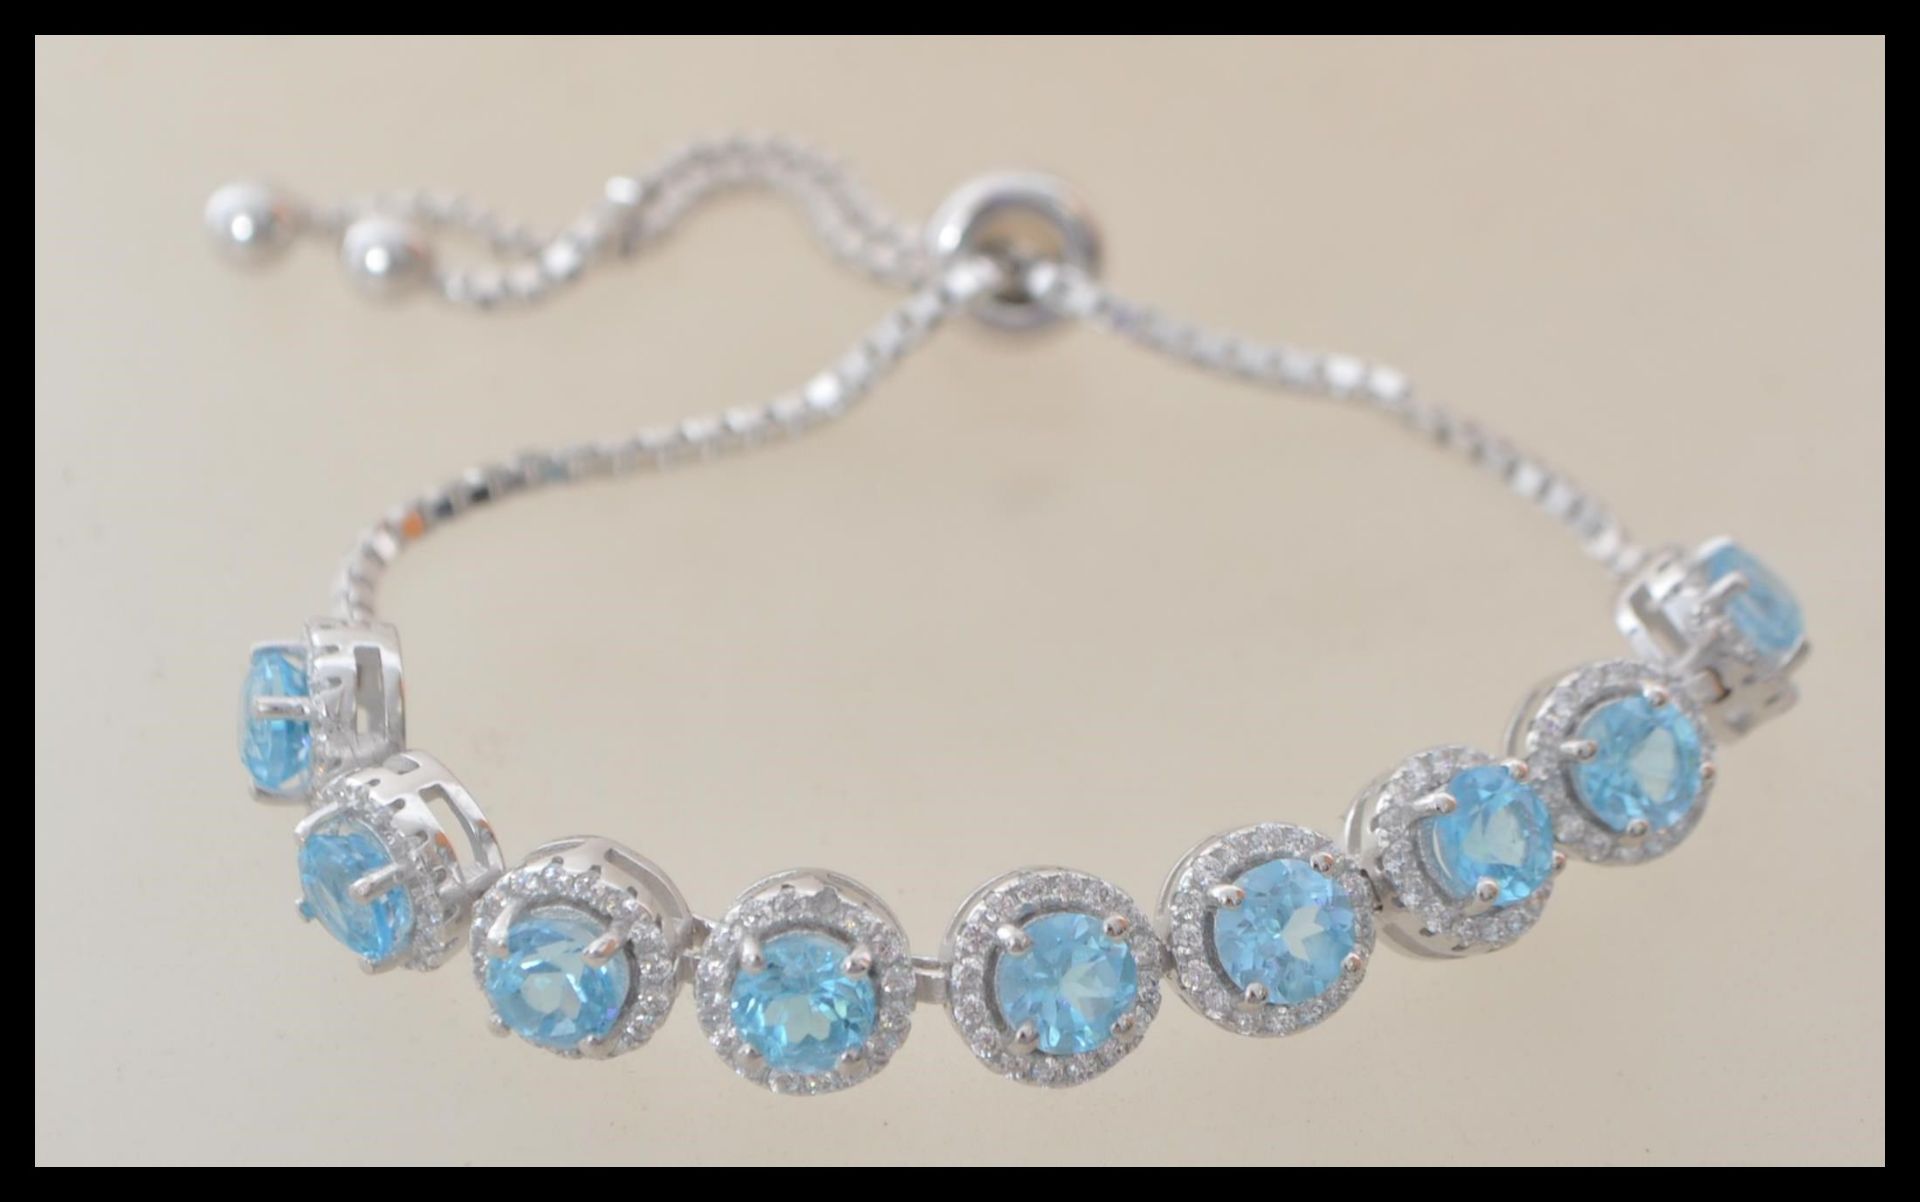 A stamped 925 silver bracelet having round panels set with cz's and blue topaz stones. Weight 10.3g.